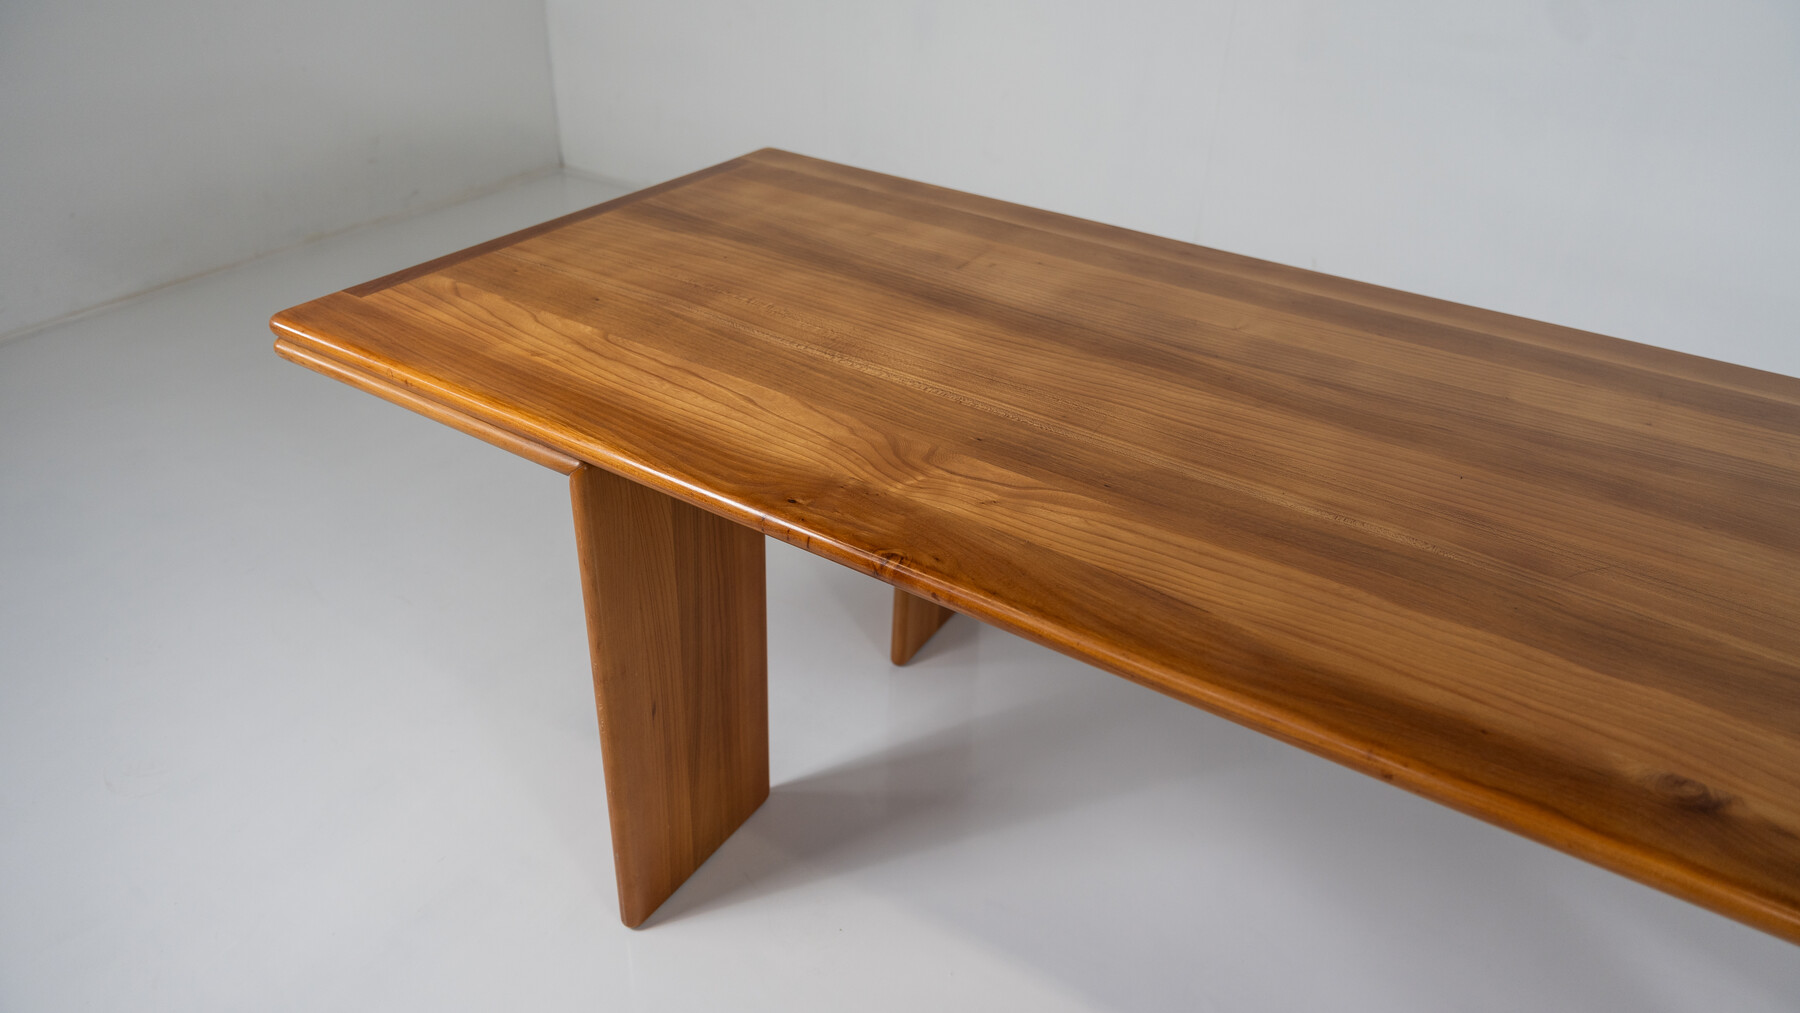 Mid-Century Modern Dining Table in the style of Mario Marenco, Italy, 1980s